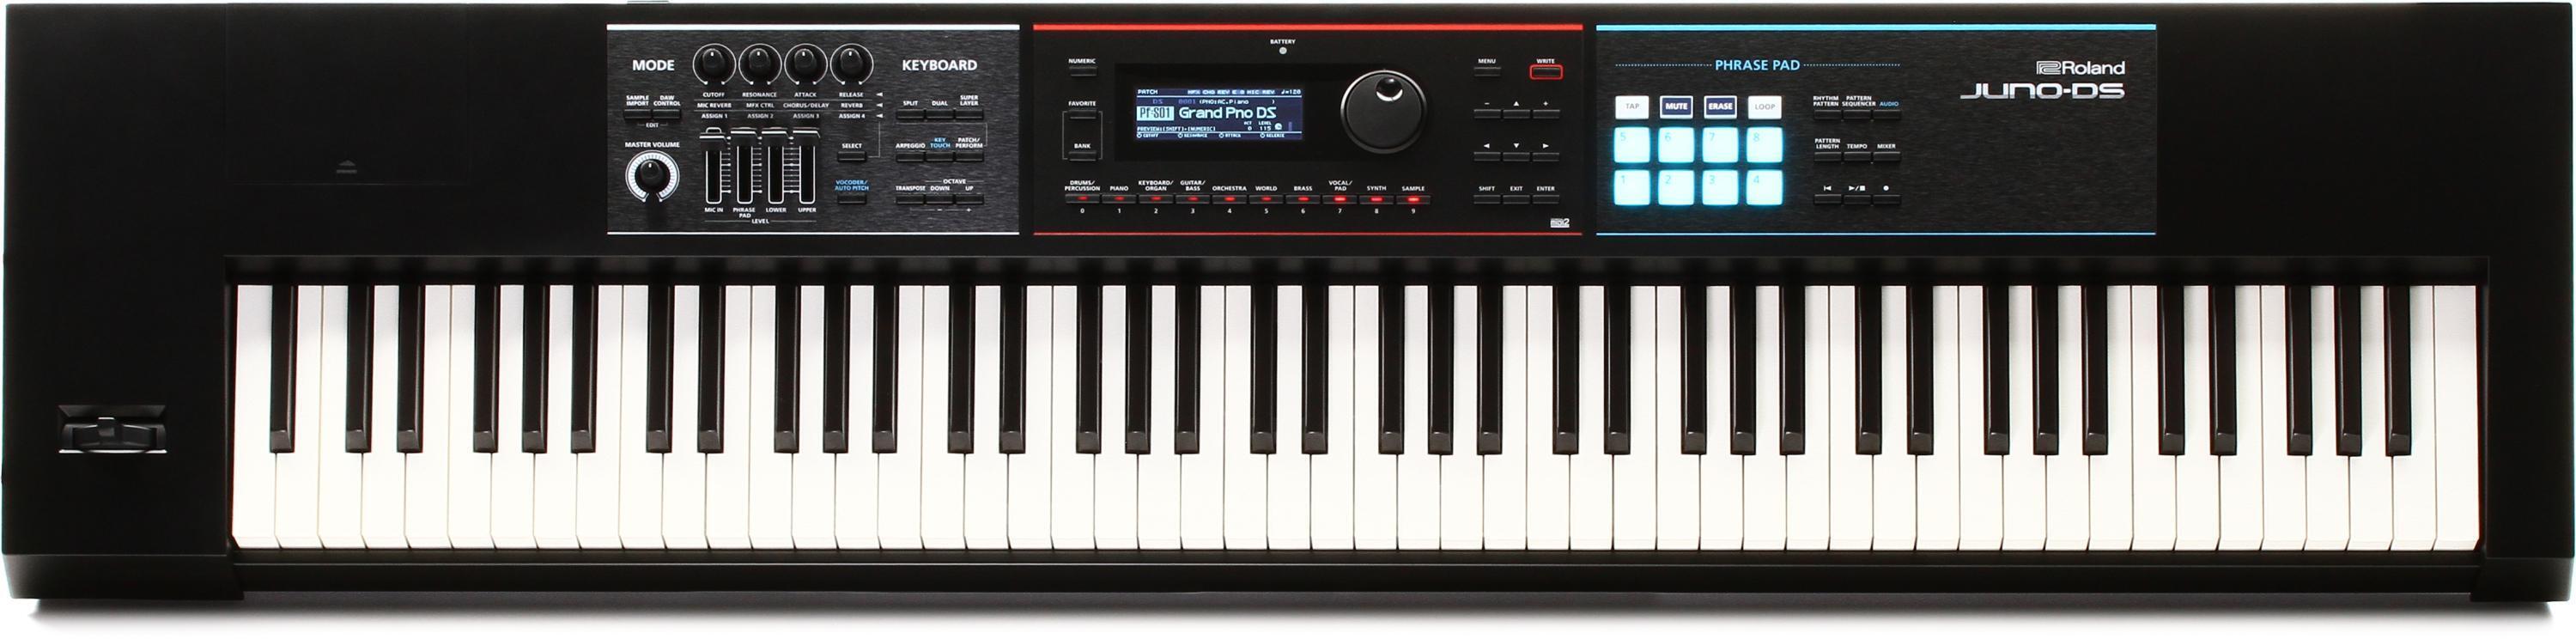 Roland JUNO-DS88 88-key Synthesizer | Sweetwater